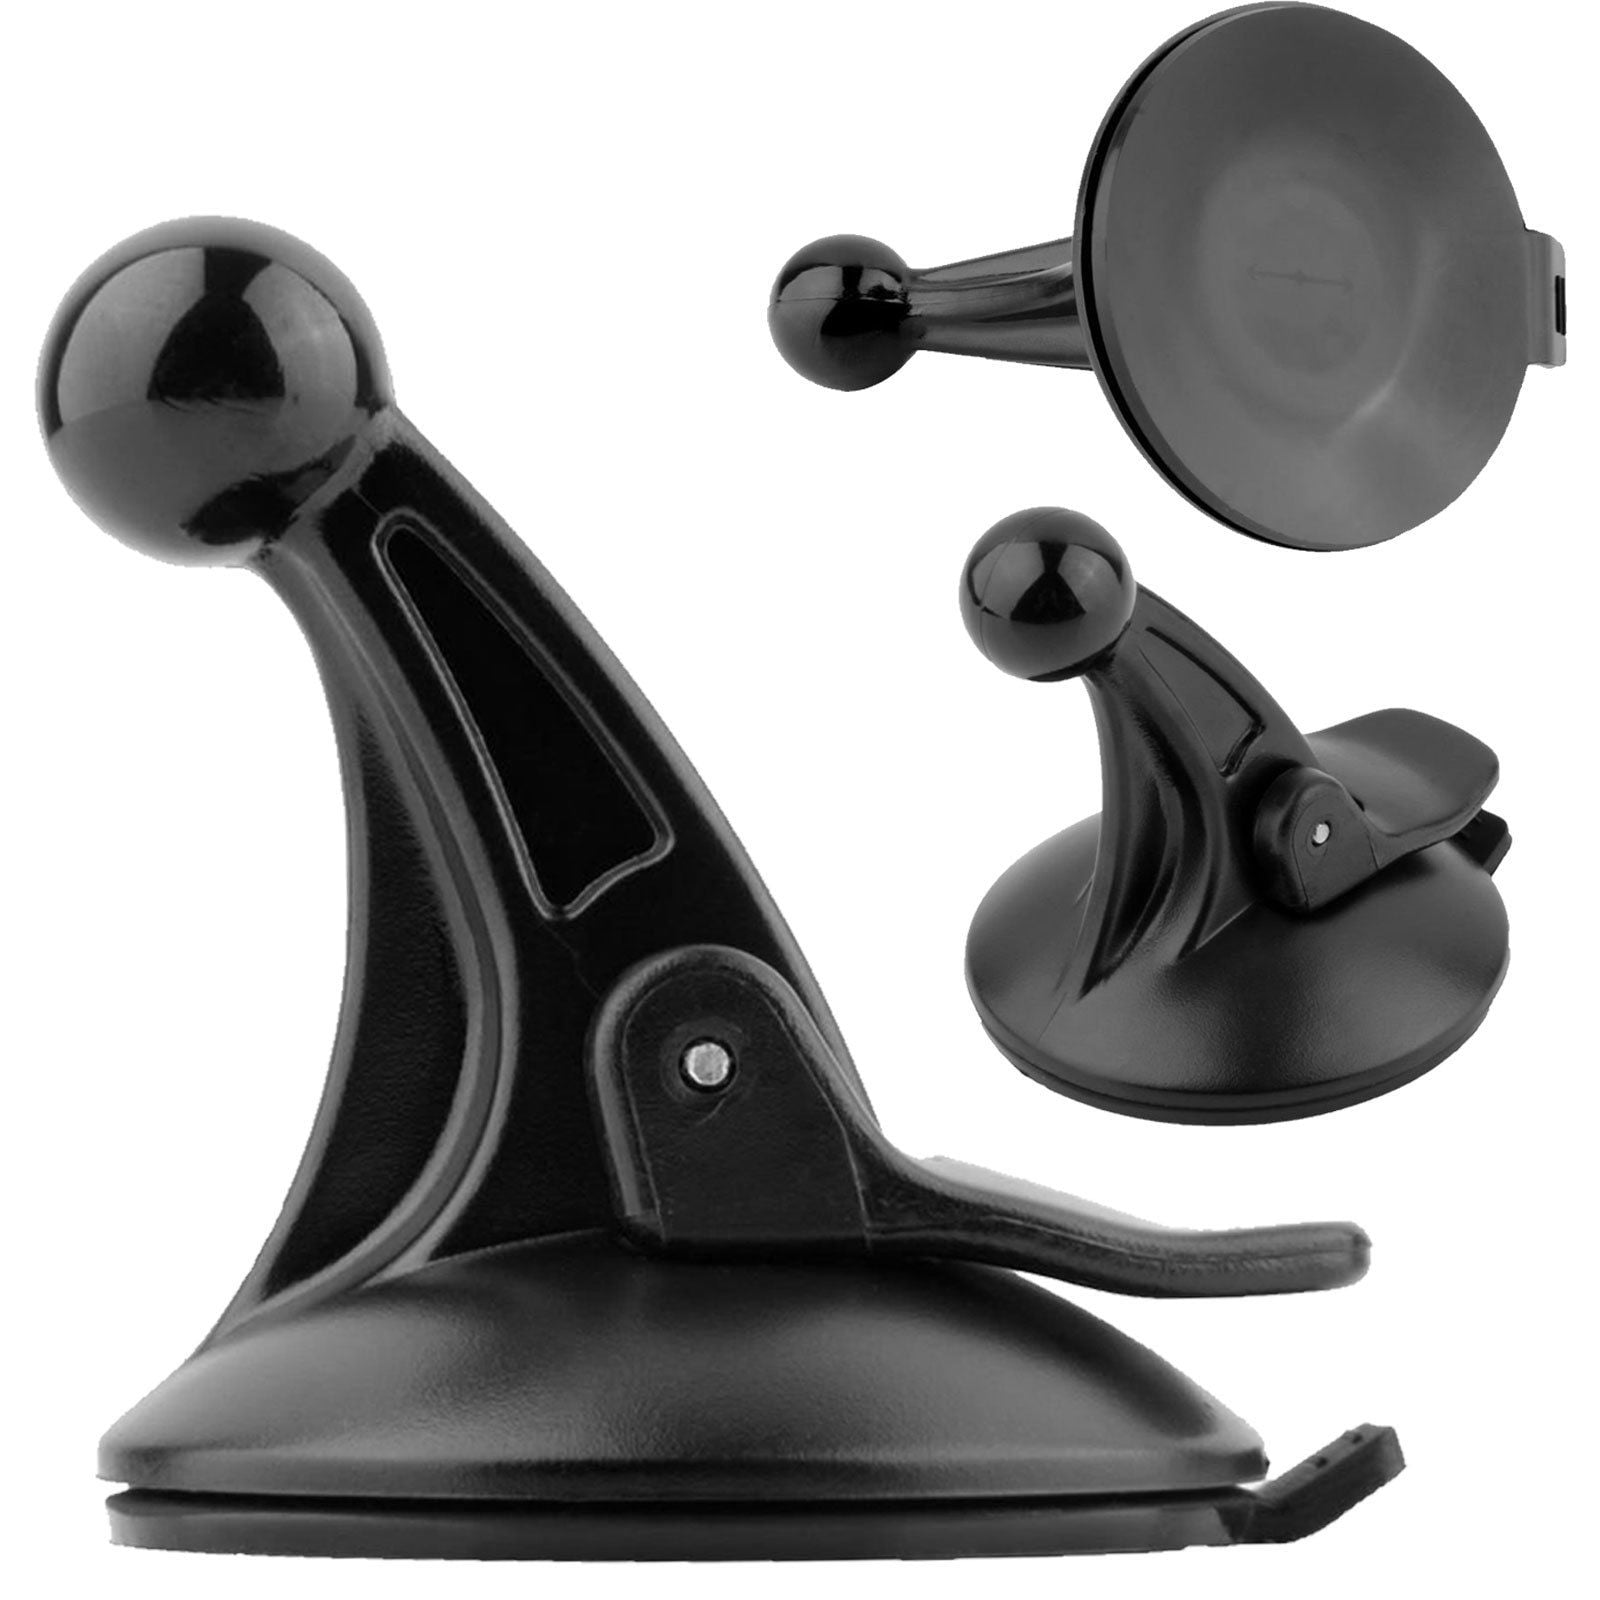 Windshield Windscreen Car Suction Cup Mount Stand Holder For Garmin Nuvi Gps 